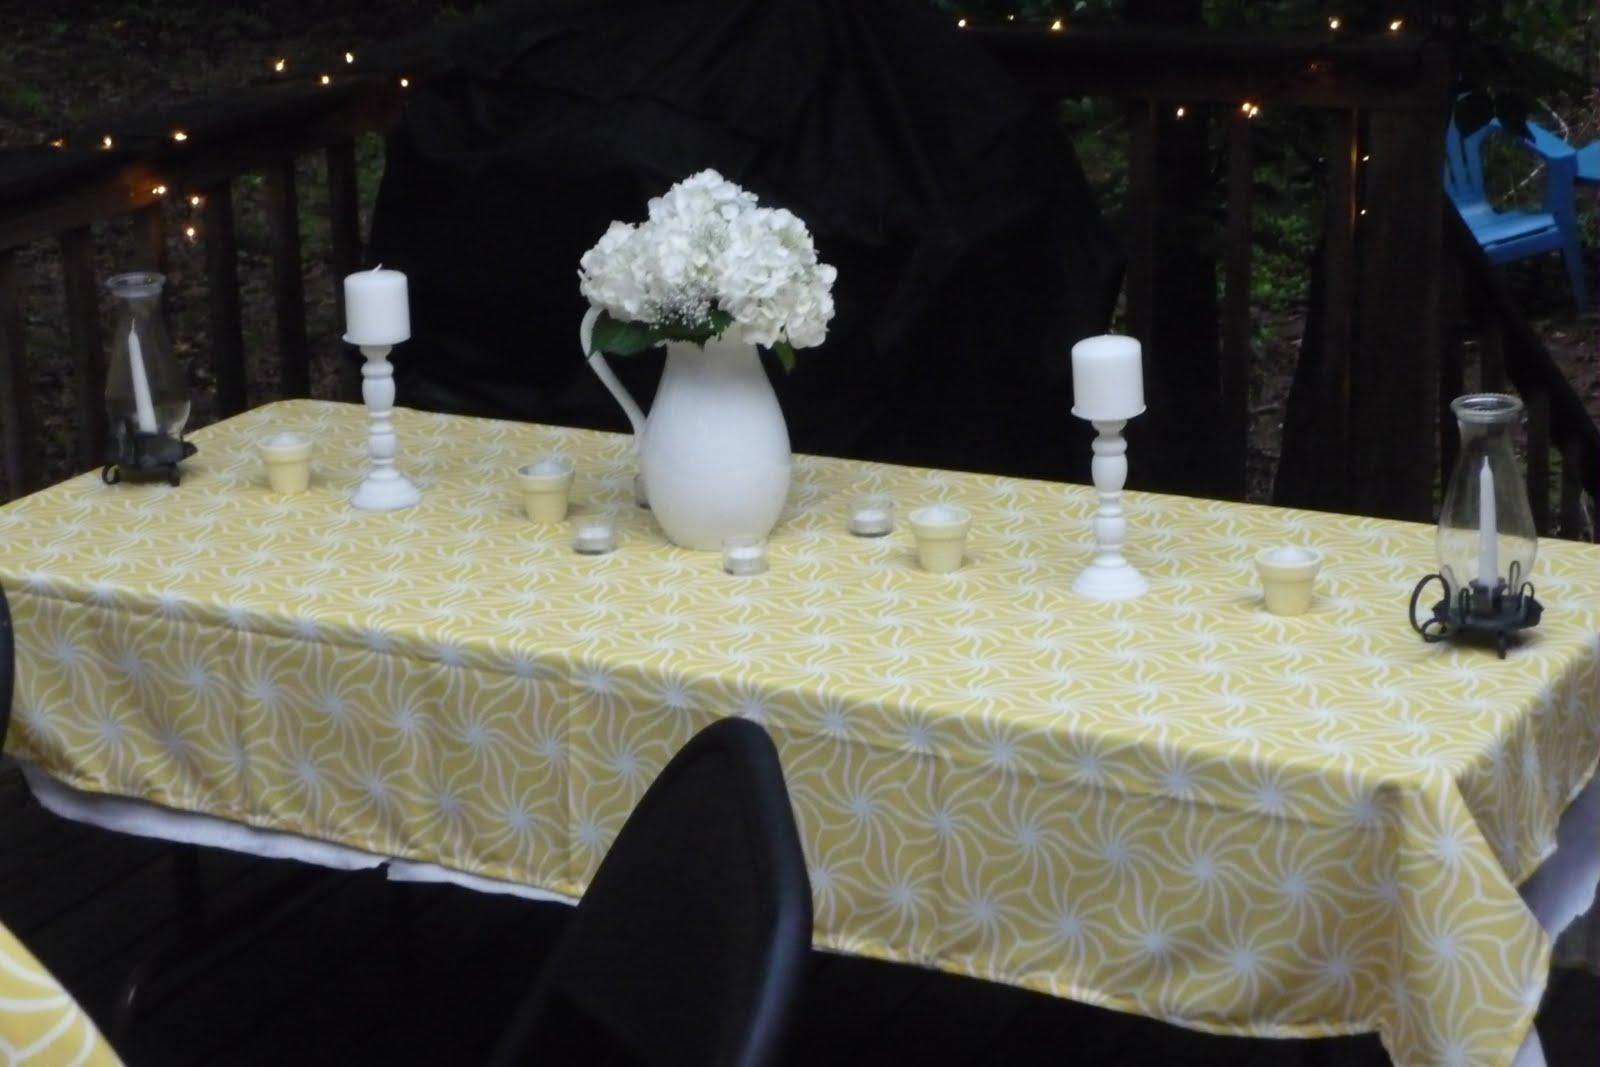 the tables with tea lights